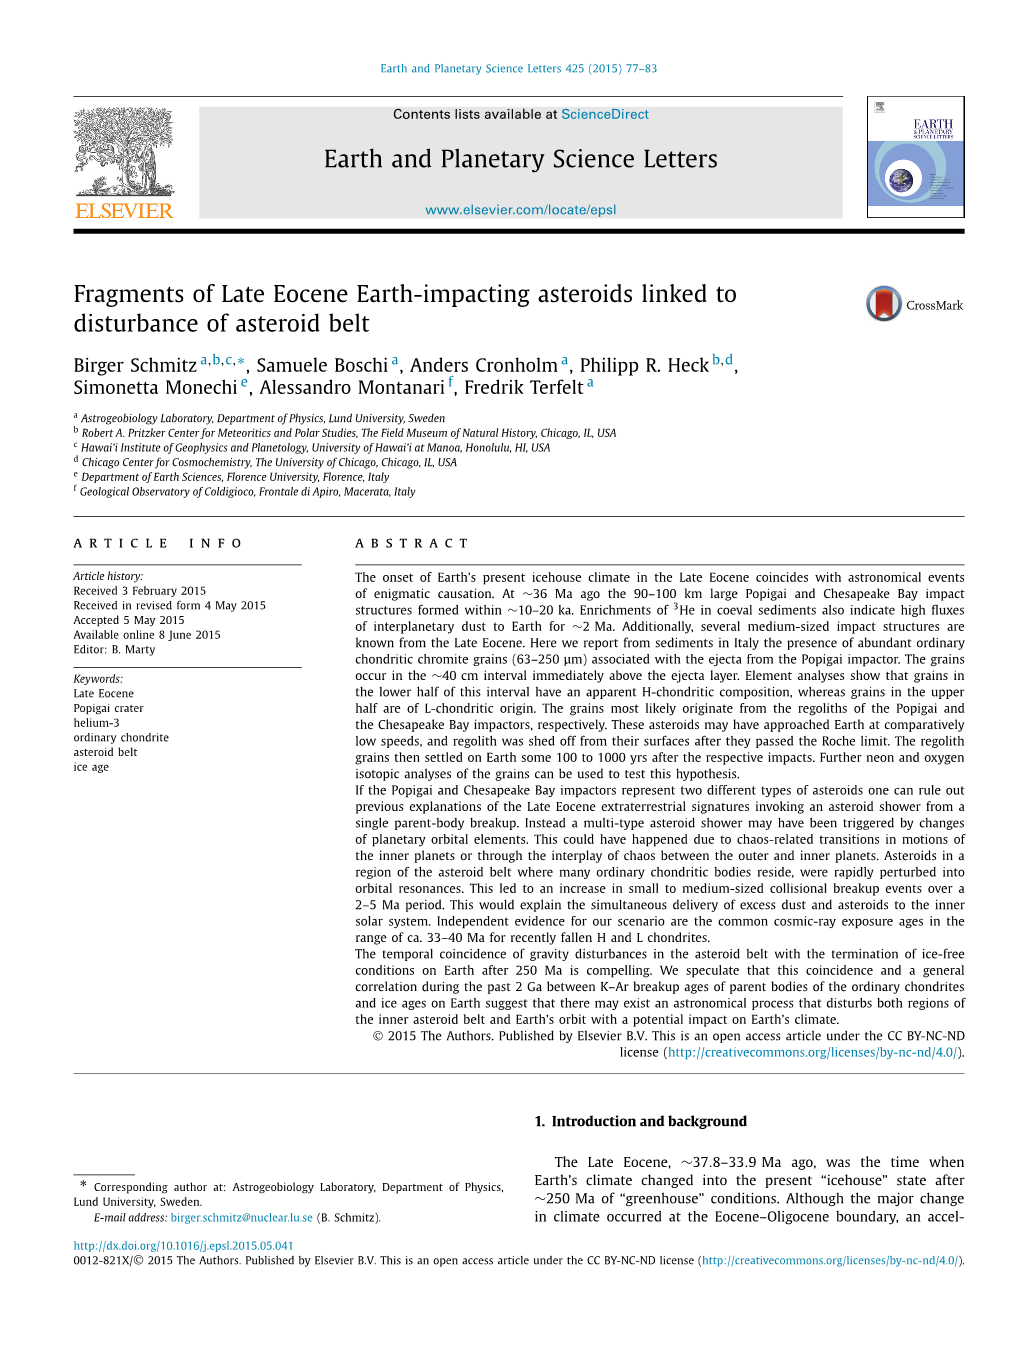 Fragments of Late Eocene Earth-Impacting Asteroids Linked to Disturbance of Asteroid Belt ∗ Birger Schmitz A,B,C, , Samuele Boschi A, Anders Cronholm A, Philipp R